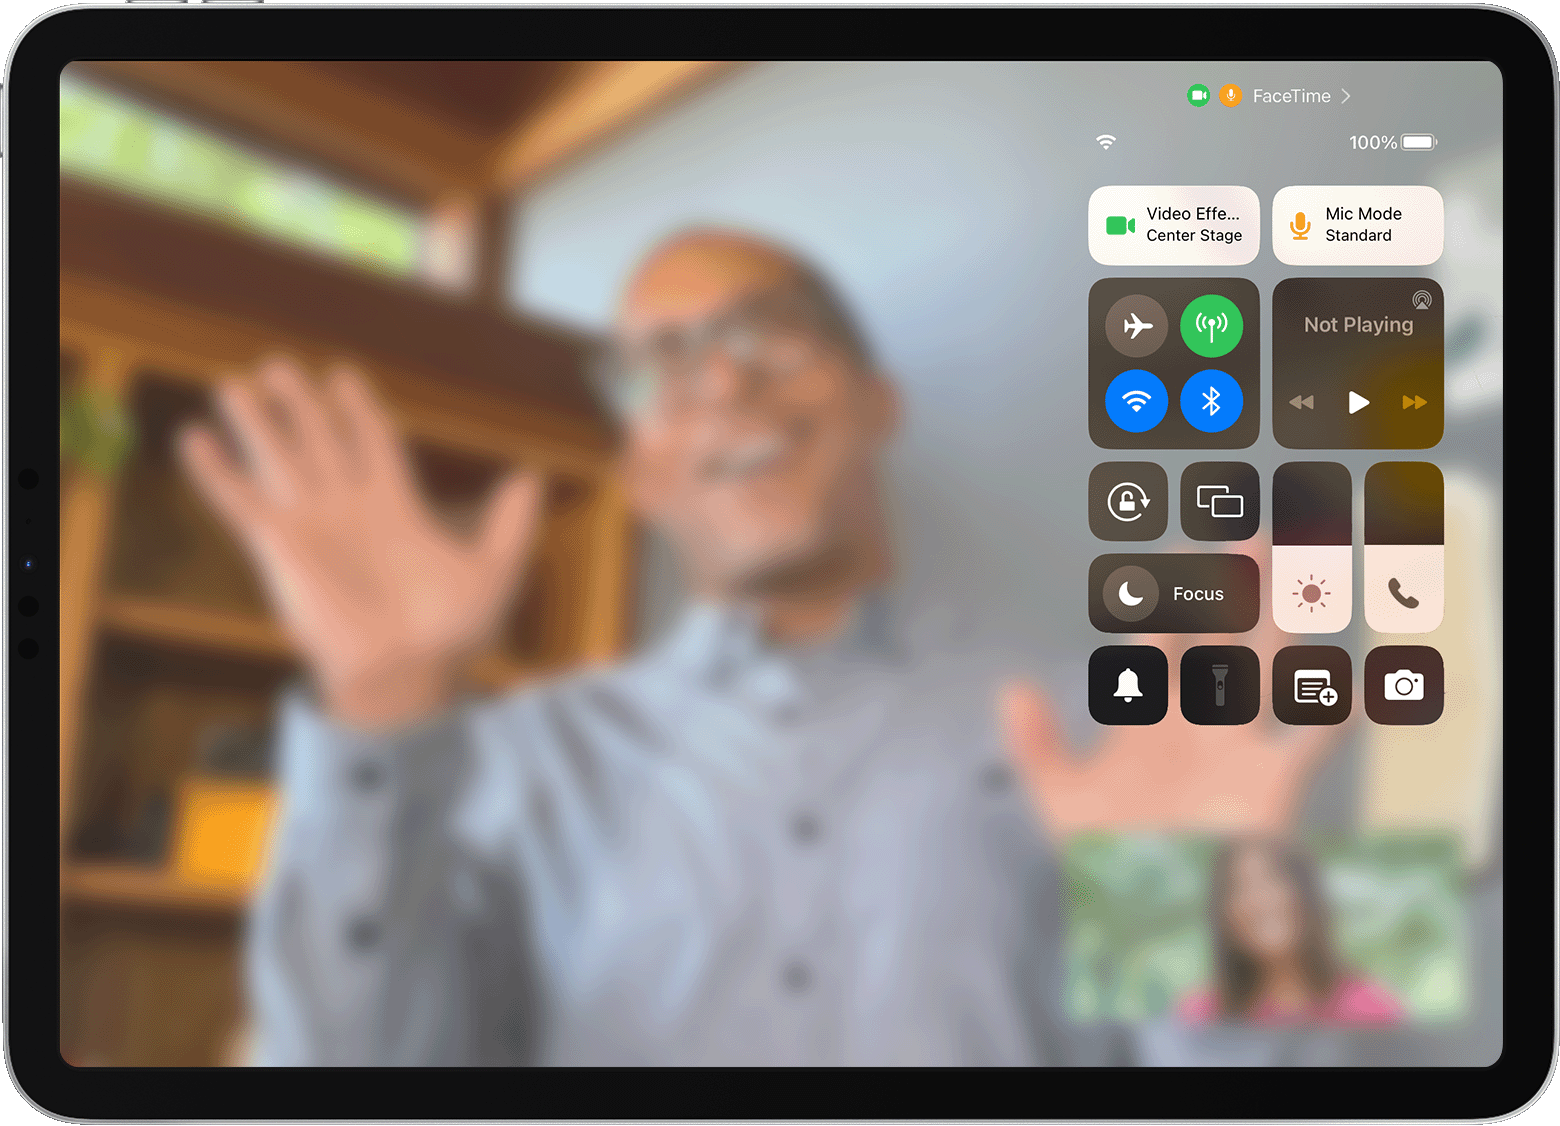 iPad screen shows a FaceTime call with Control Center visible, including the Video Effects button